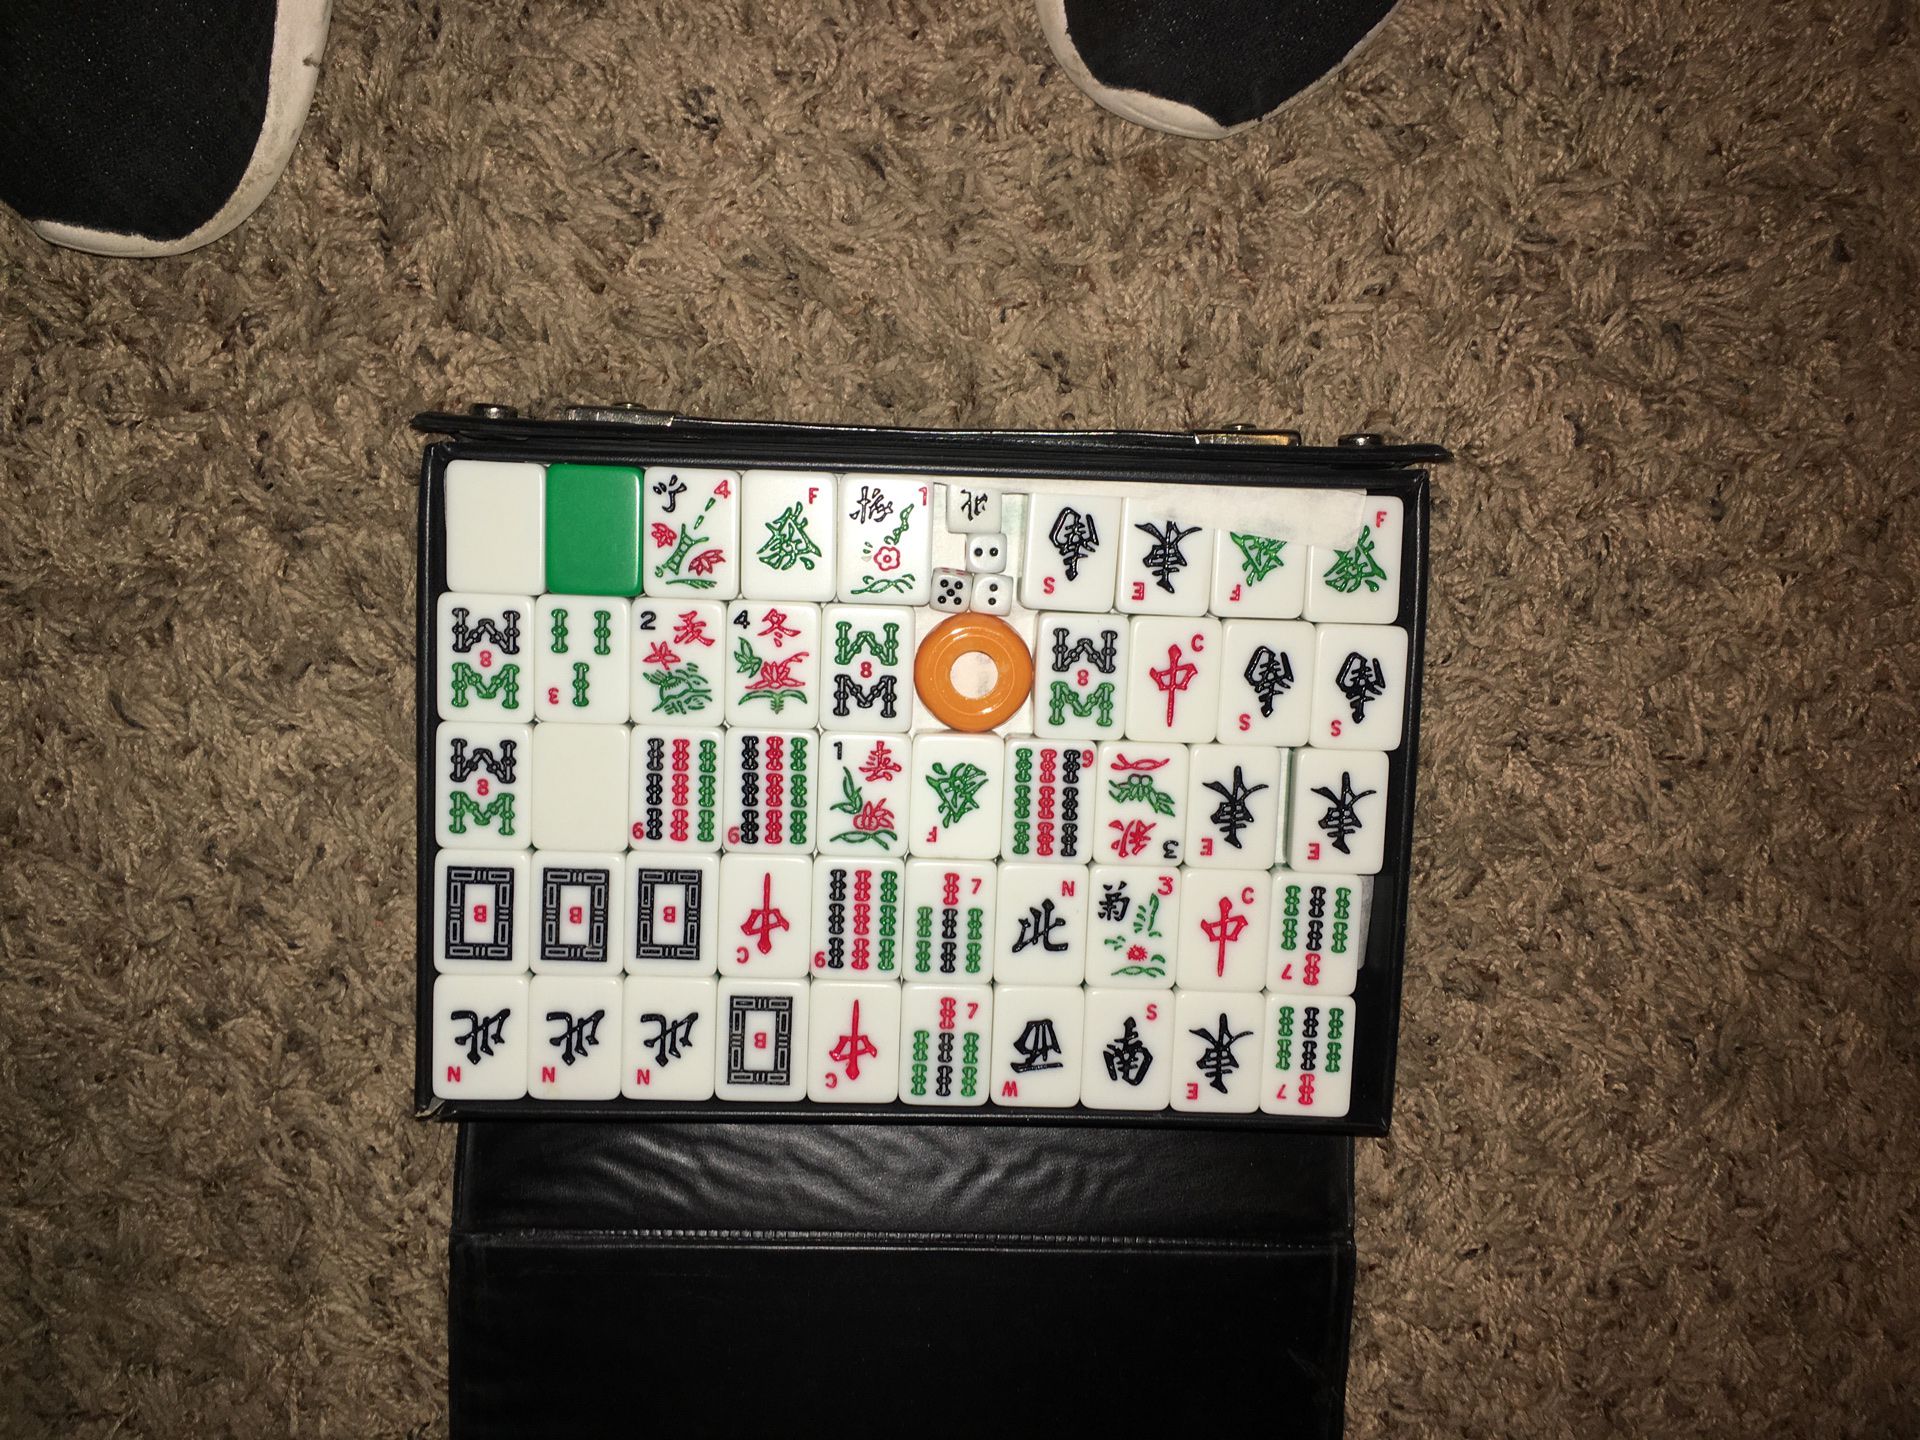 Genuine ivory MAH JONG set complete dice and all